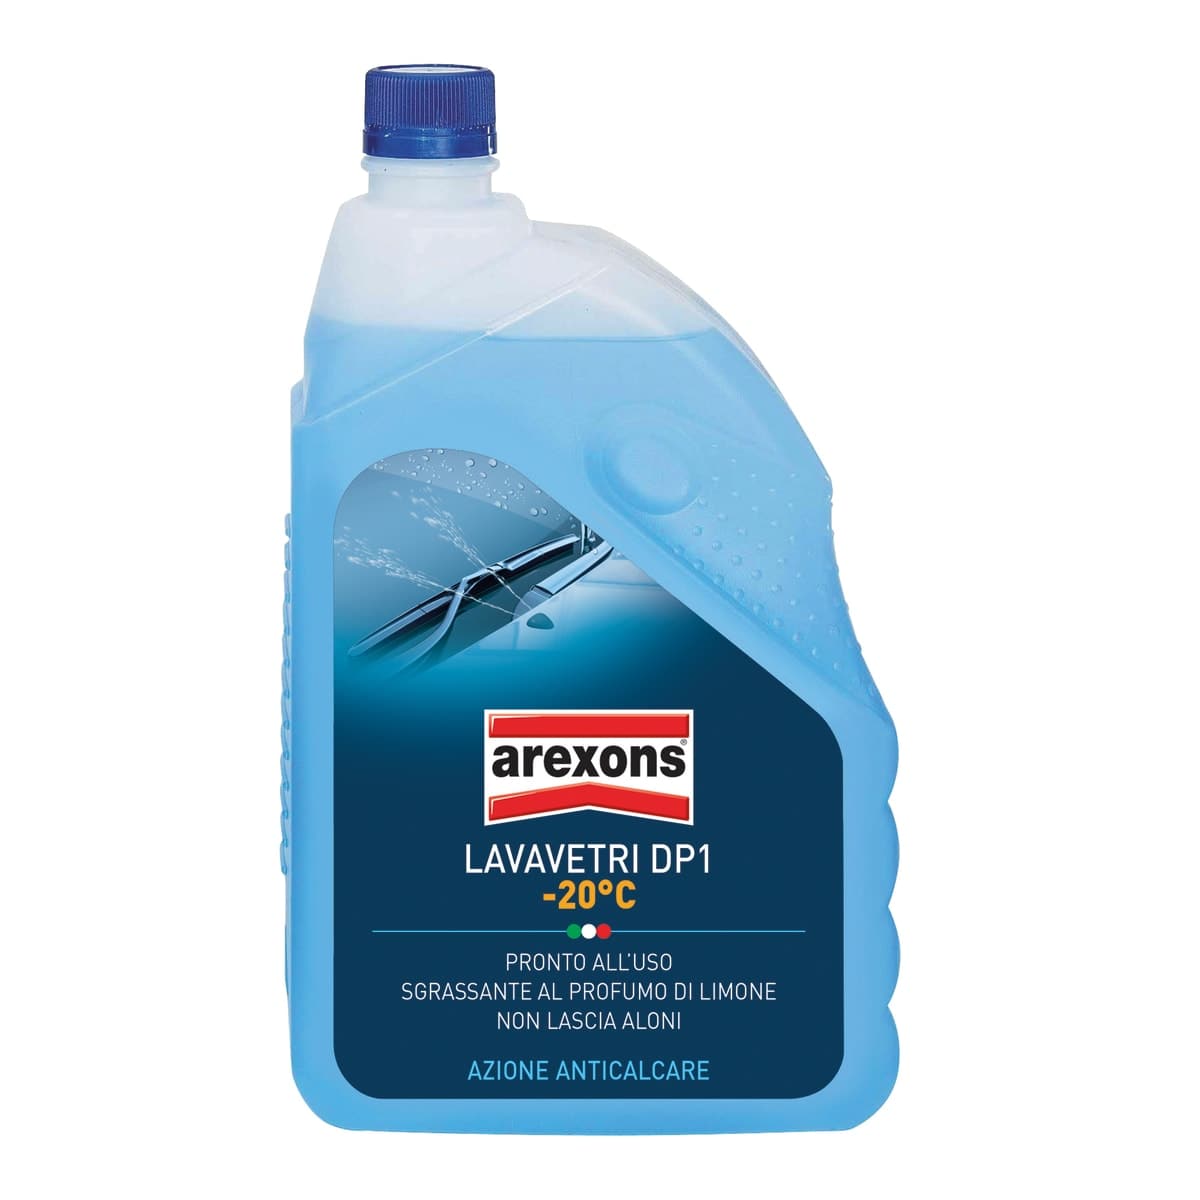 8404 READY-TO-USE GLASS CLEANER -20 LT 2 - best price from Maltashopper.com BR490110039